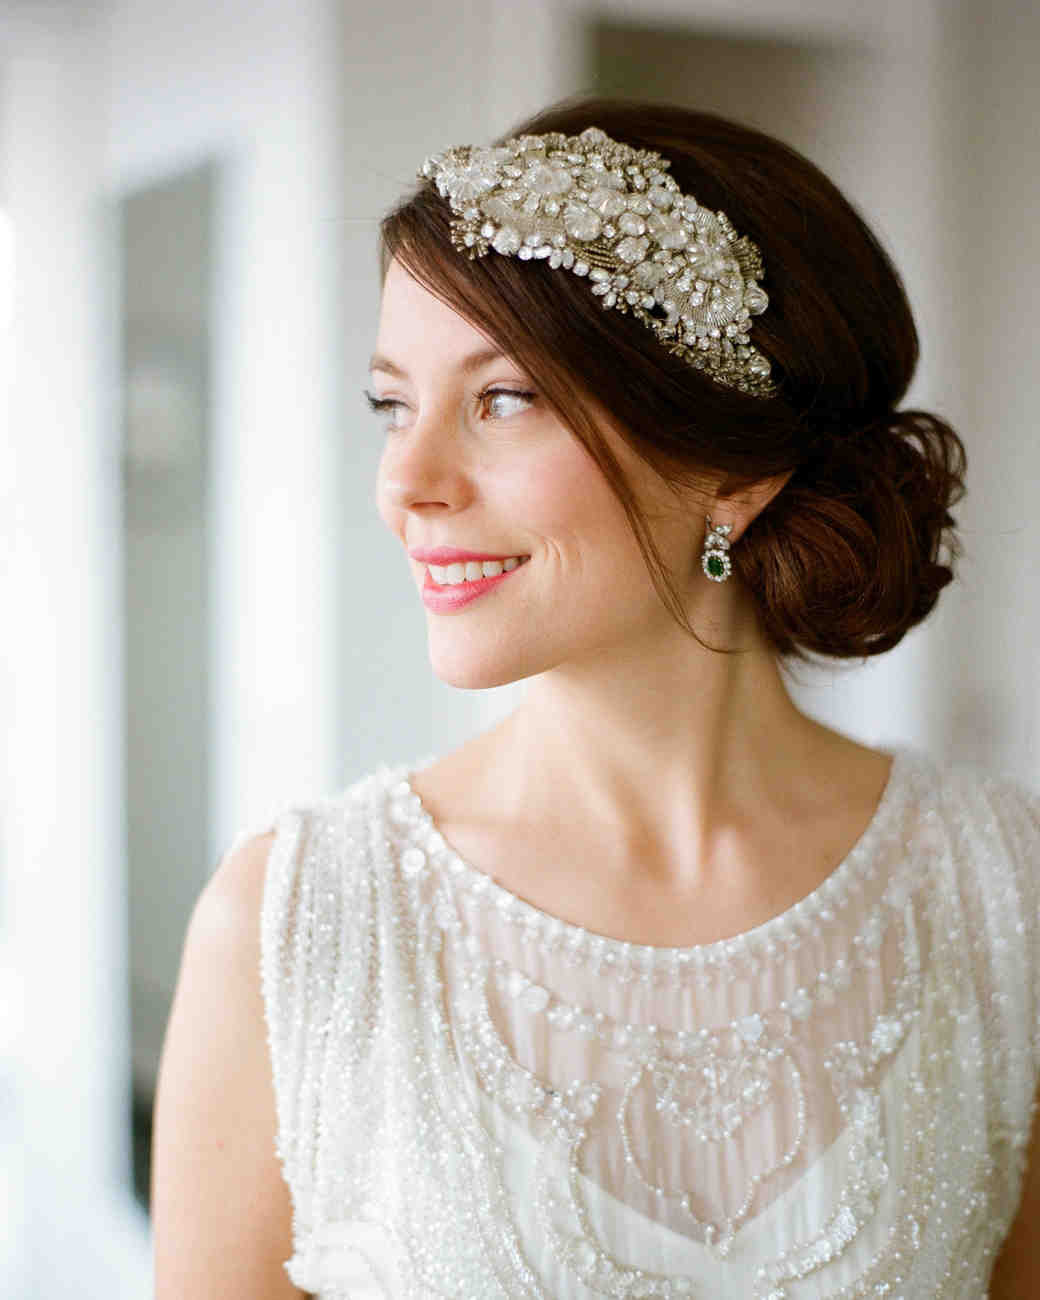 Wedding Hairstyles For The Bride
 29 Cool Wedding Hairstyles for the Modern Bride